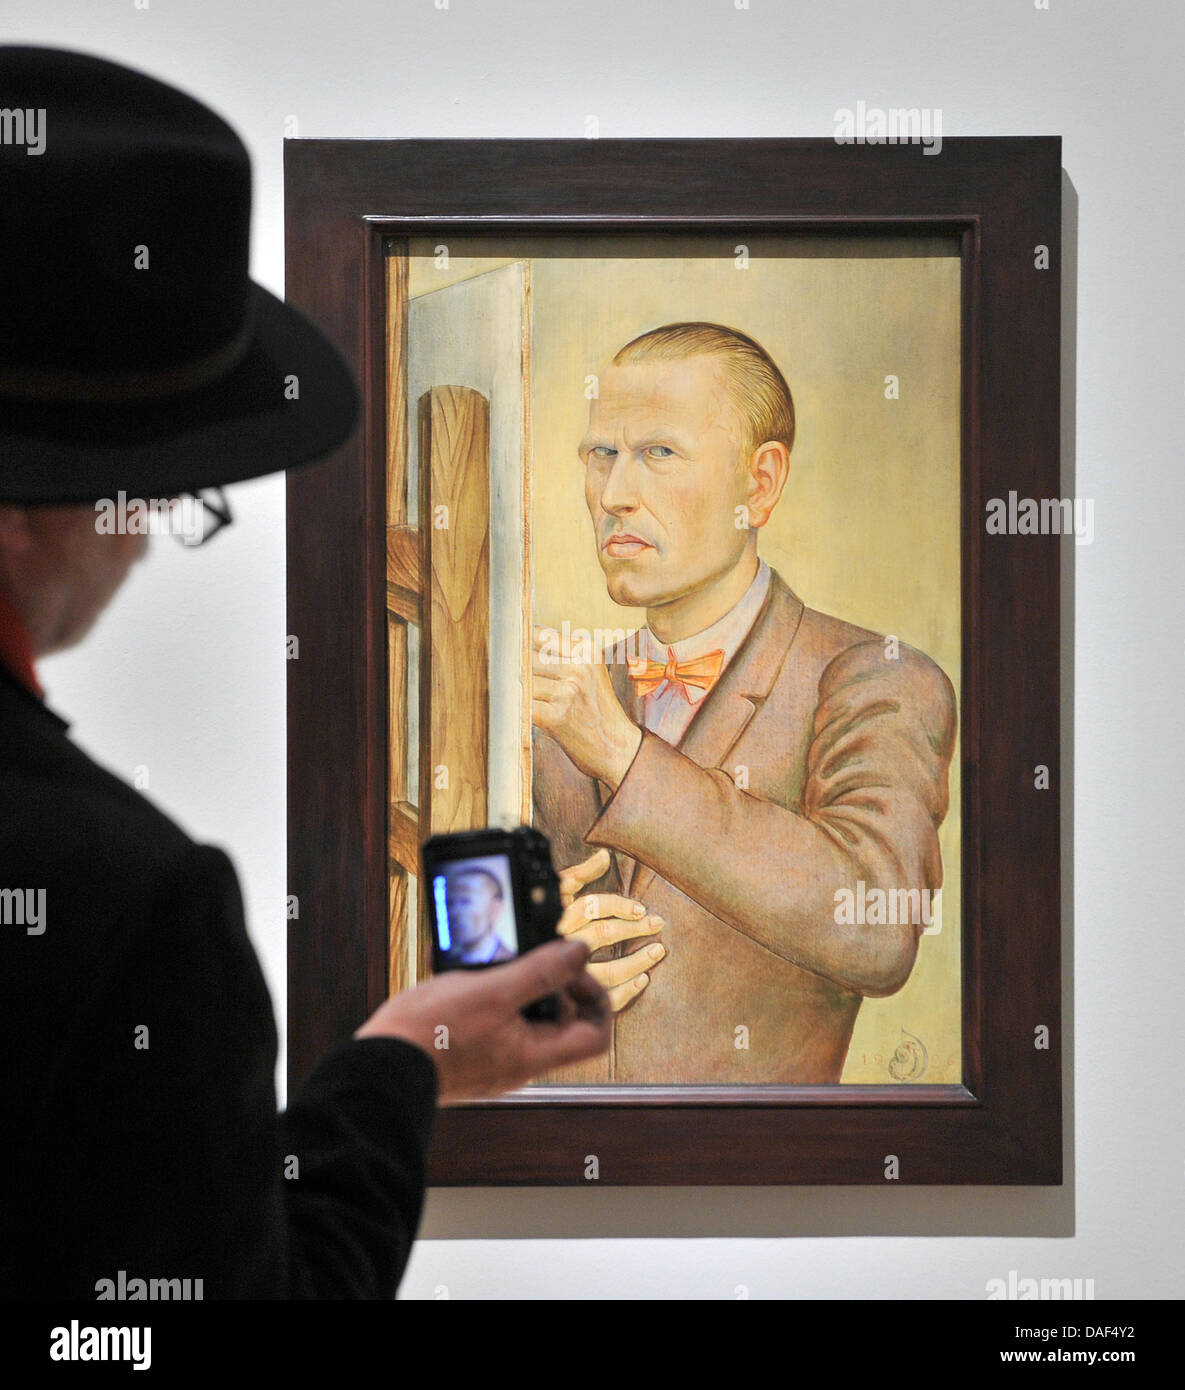 A man photographs a self portrait by Otto Dix in the Orangerie in Gera, Germany, 02 December 2011. The Kunstsammlung will open a retrospective of the painter and graphic artist for his 120th birthday in the evening with around 200 works. The opening is part of the celebratory weekend in honour of the expressionist painter. Photo: HENDRIK SCHMIDT Stock Photo